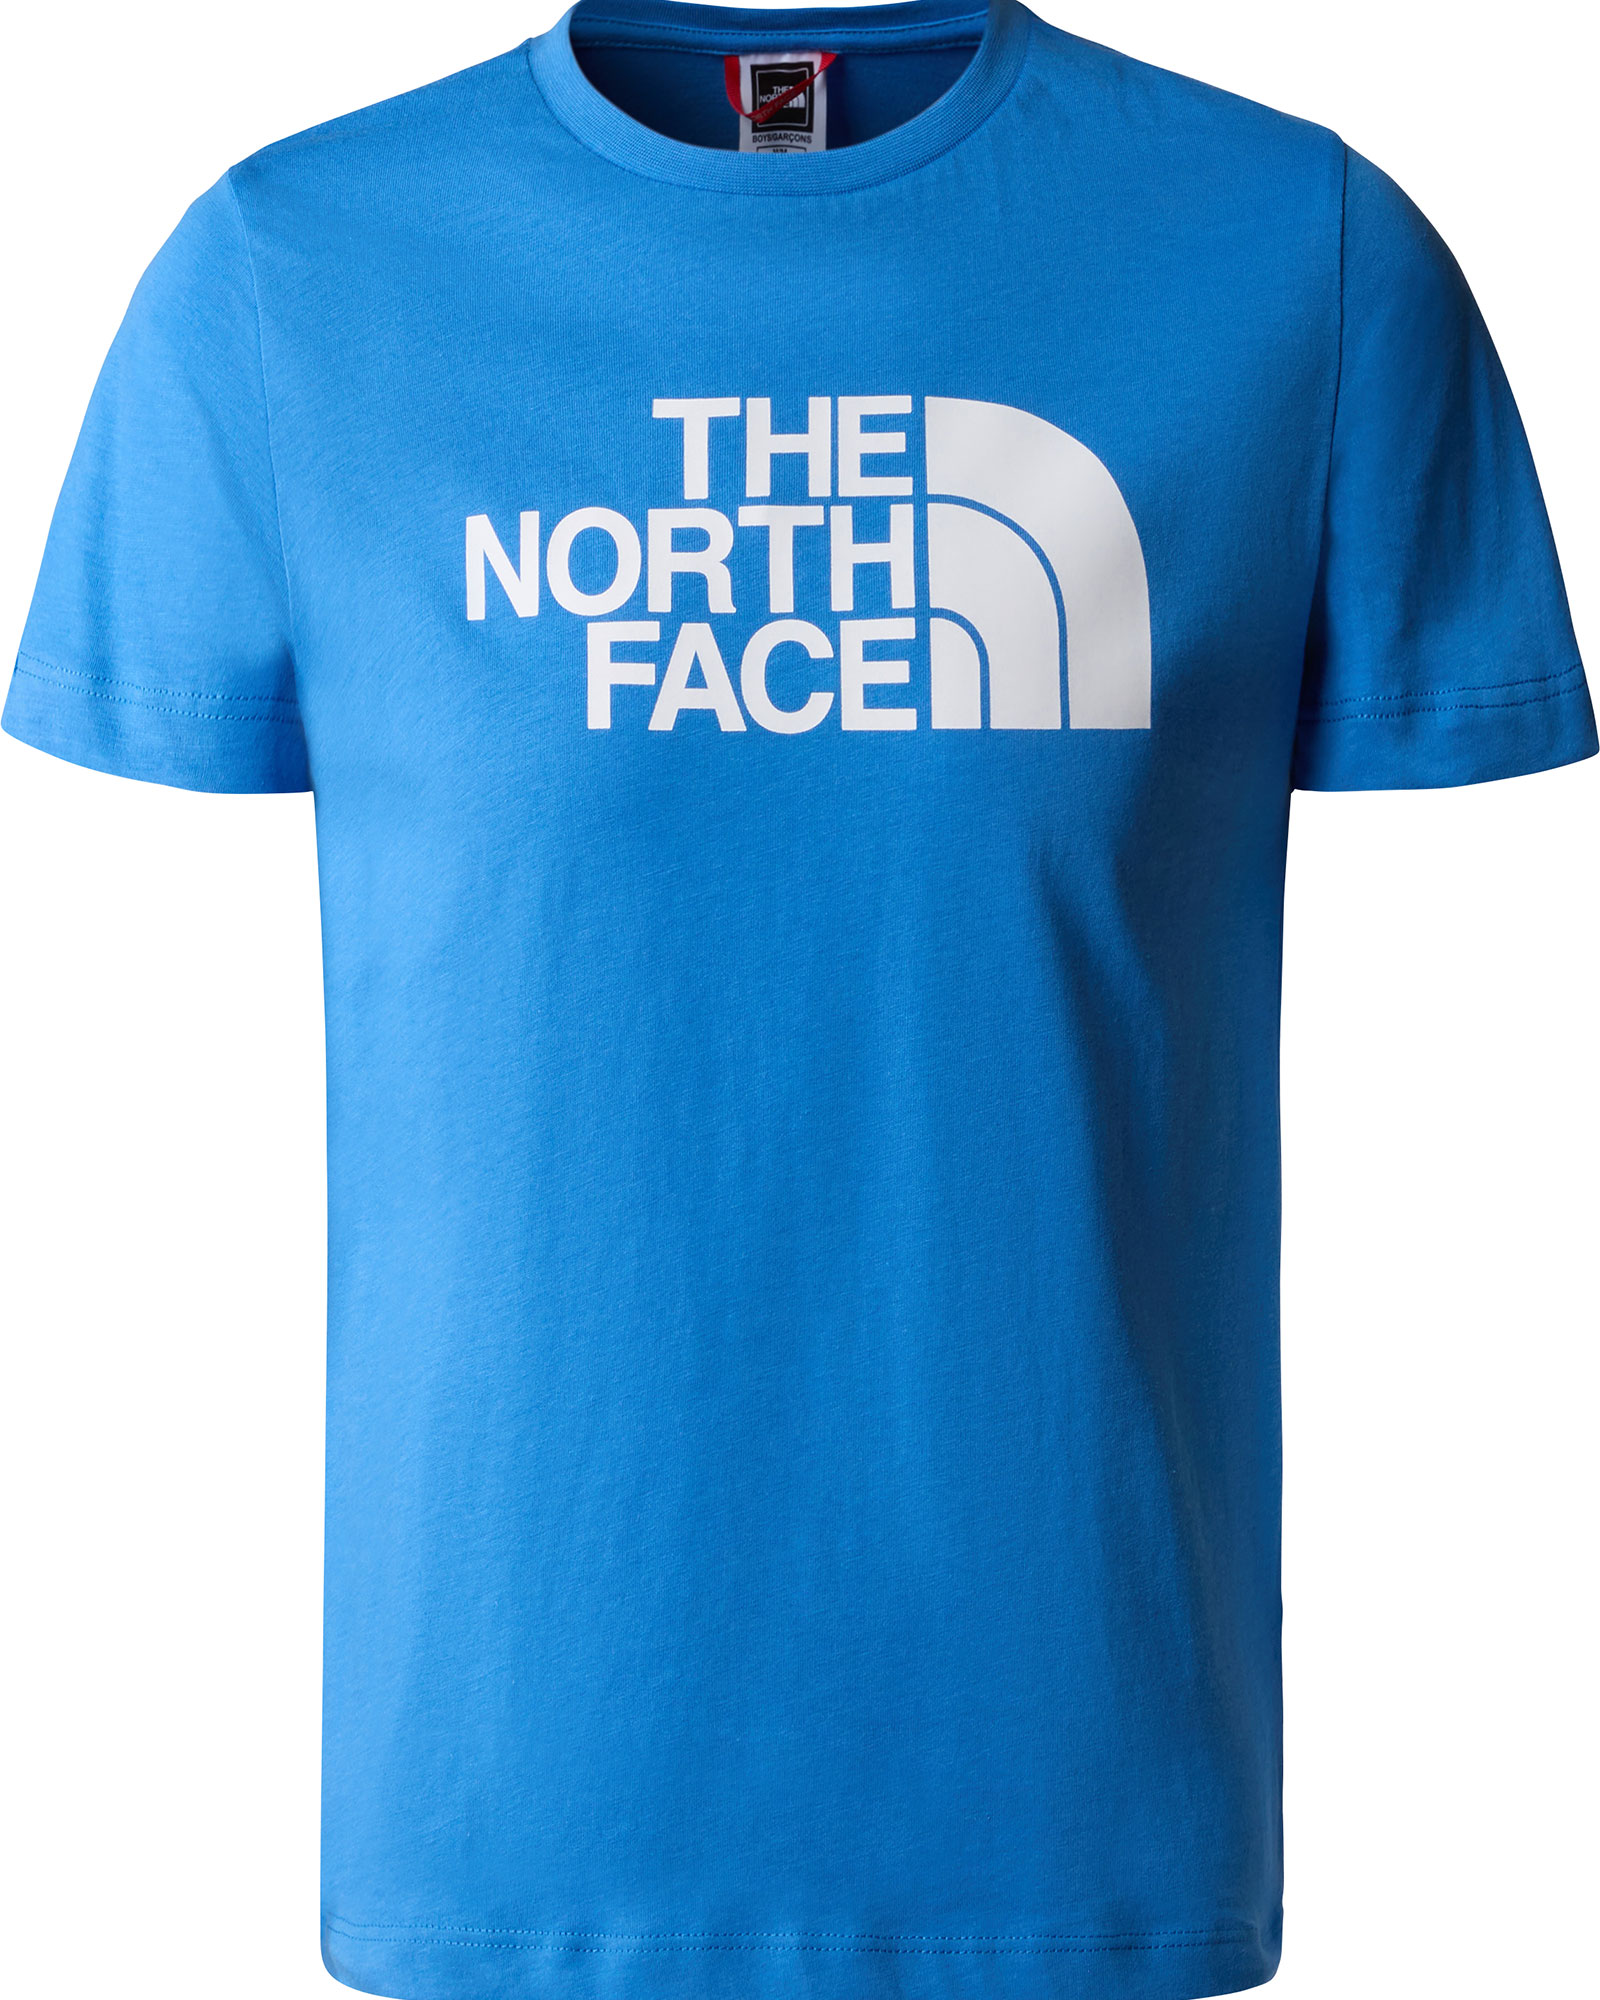 The North Face Boy’s Easy T Shirt - Super Sonic Blue L